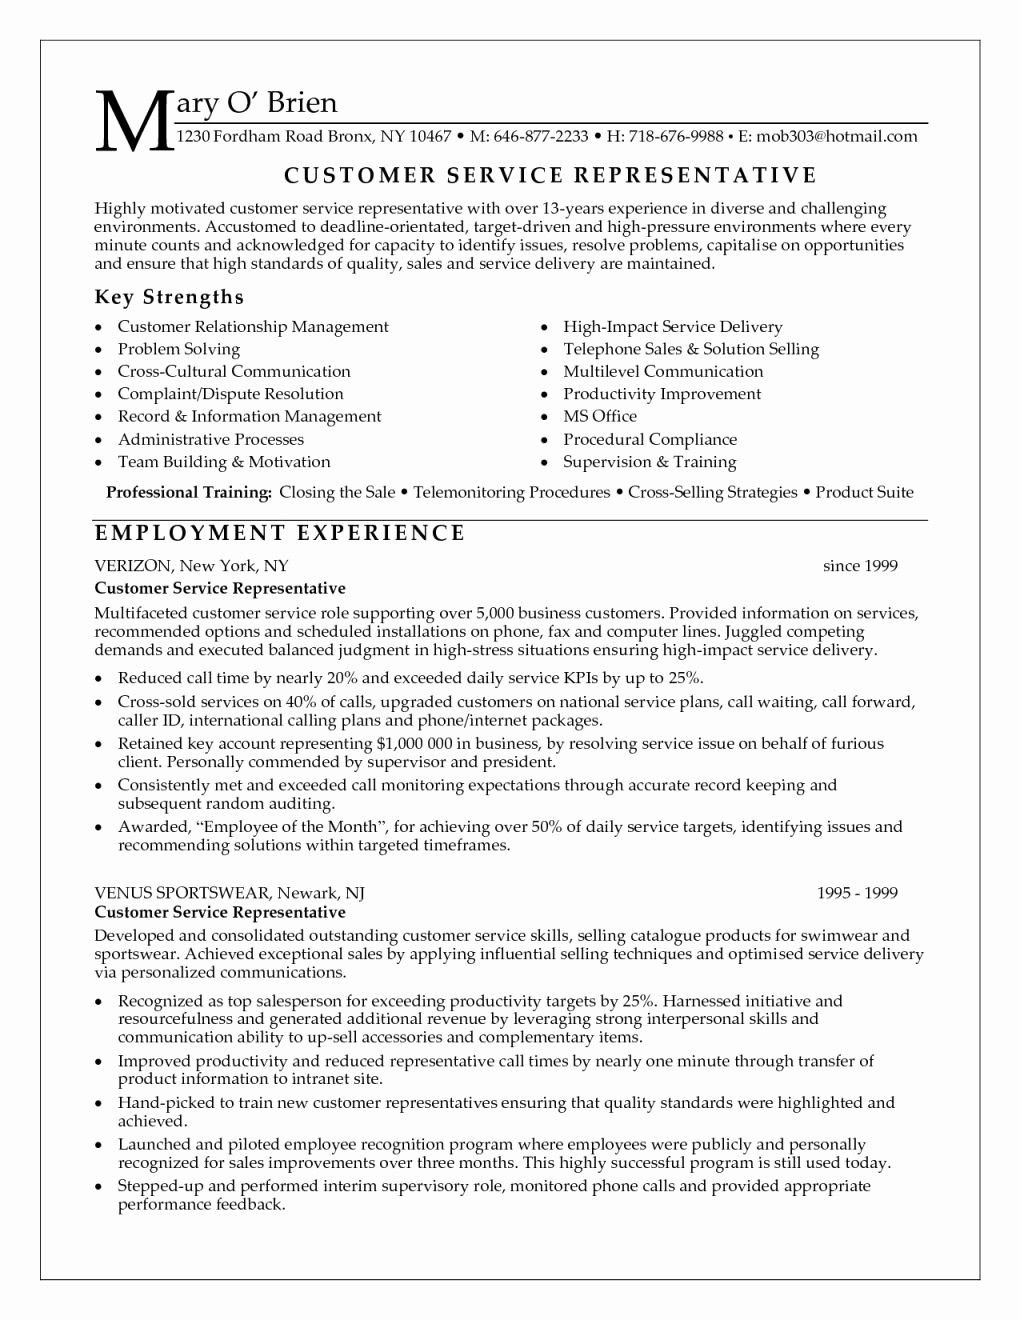 Incomplete Masters Degree On Resume Sample Examples Of Incomplete Education On Resume Unique Photos How A …